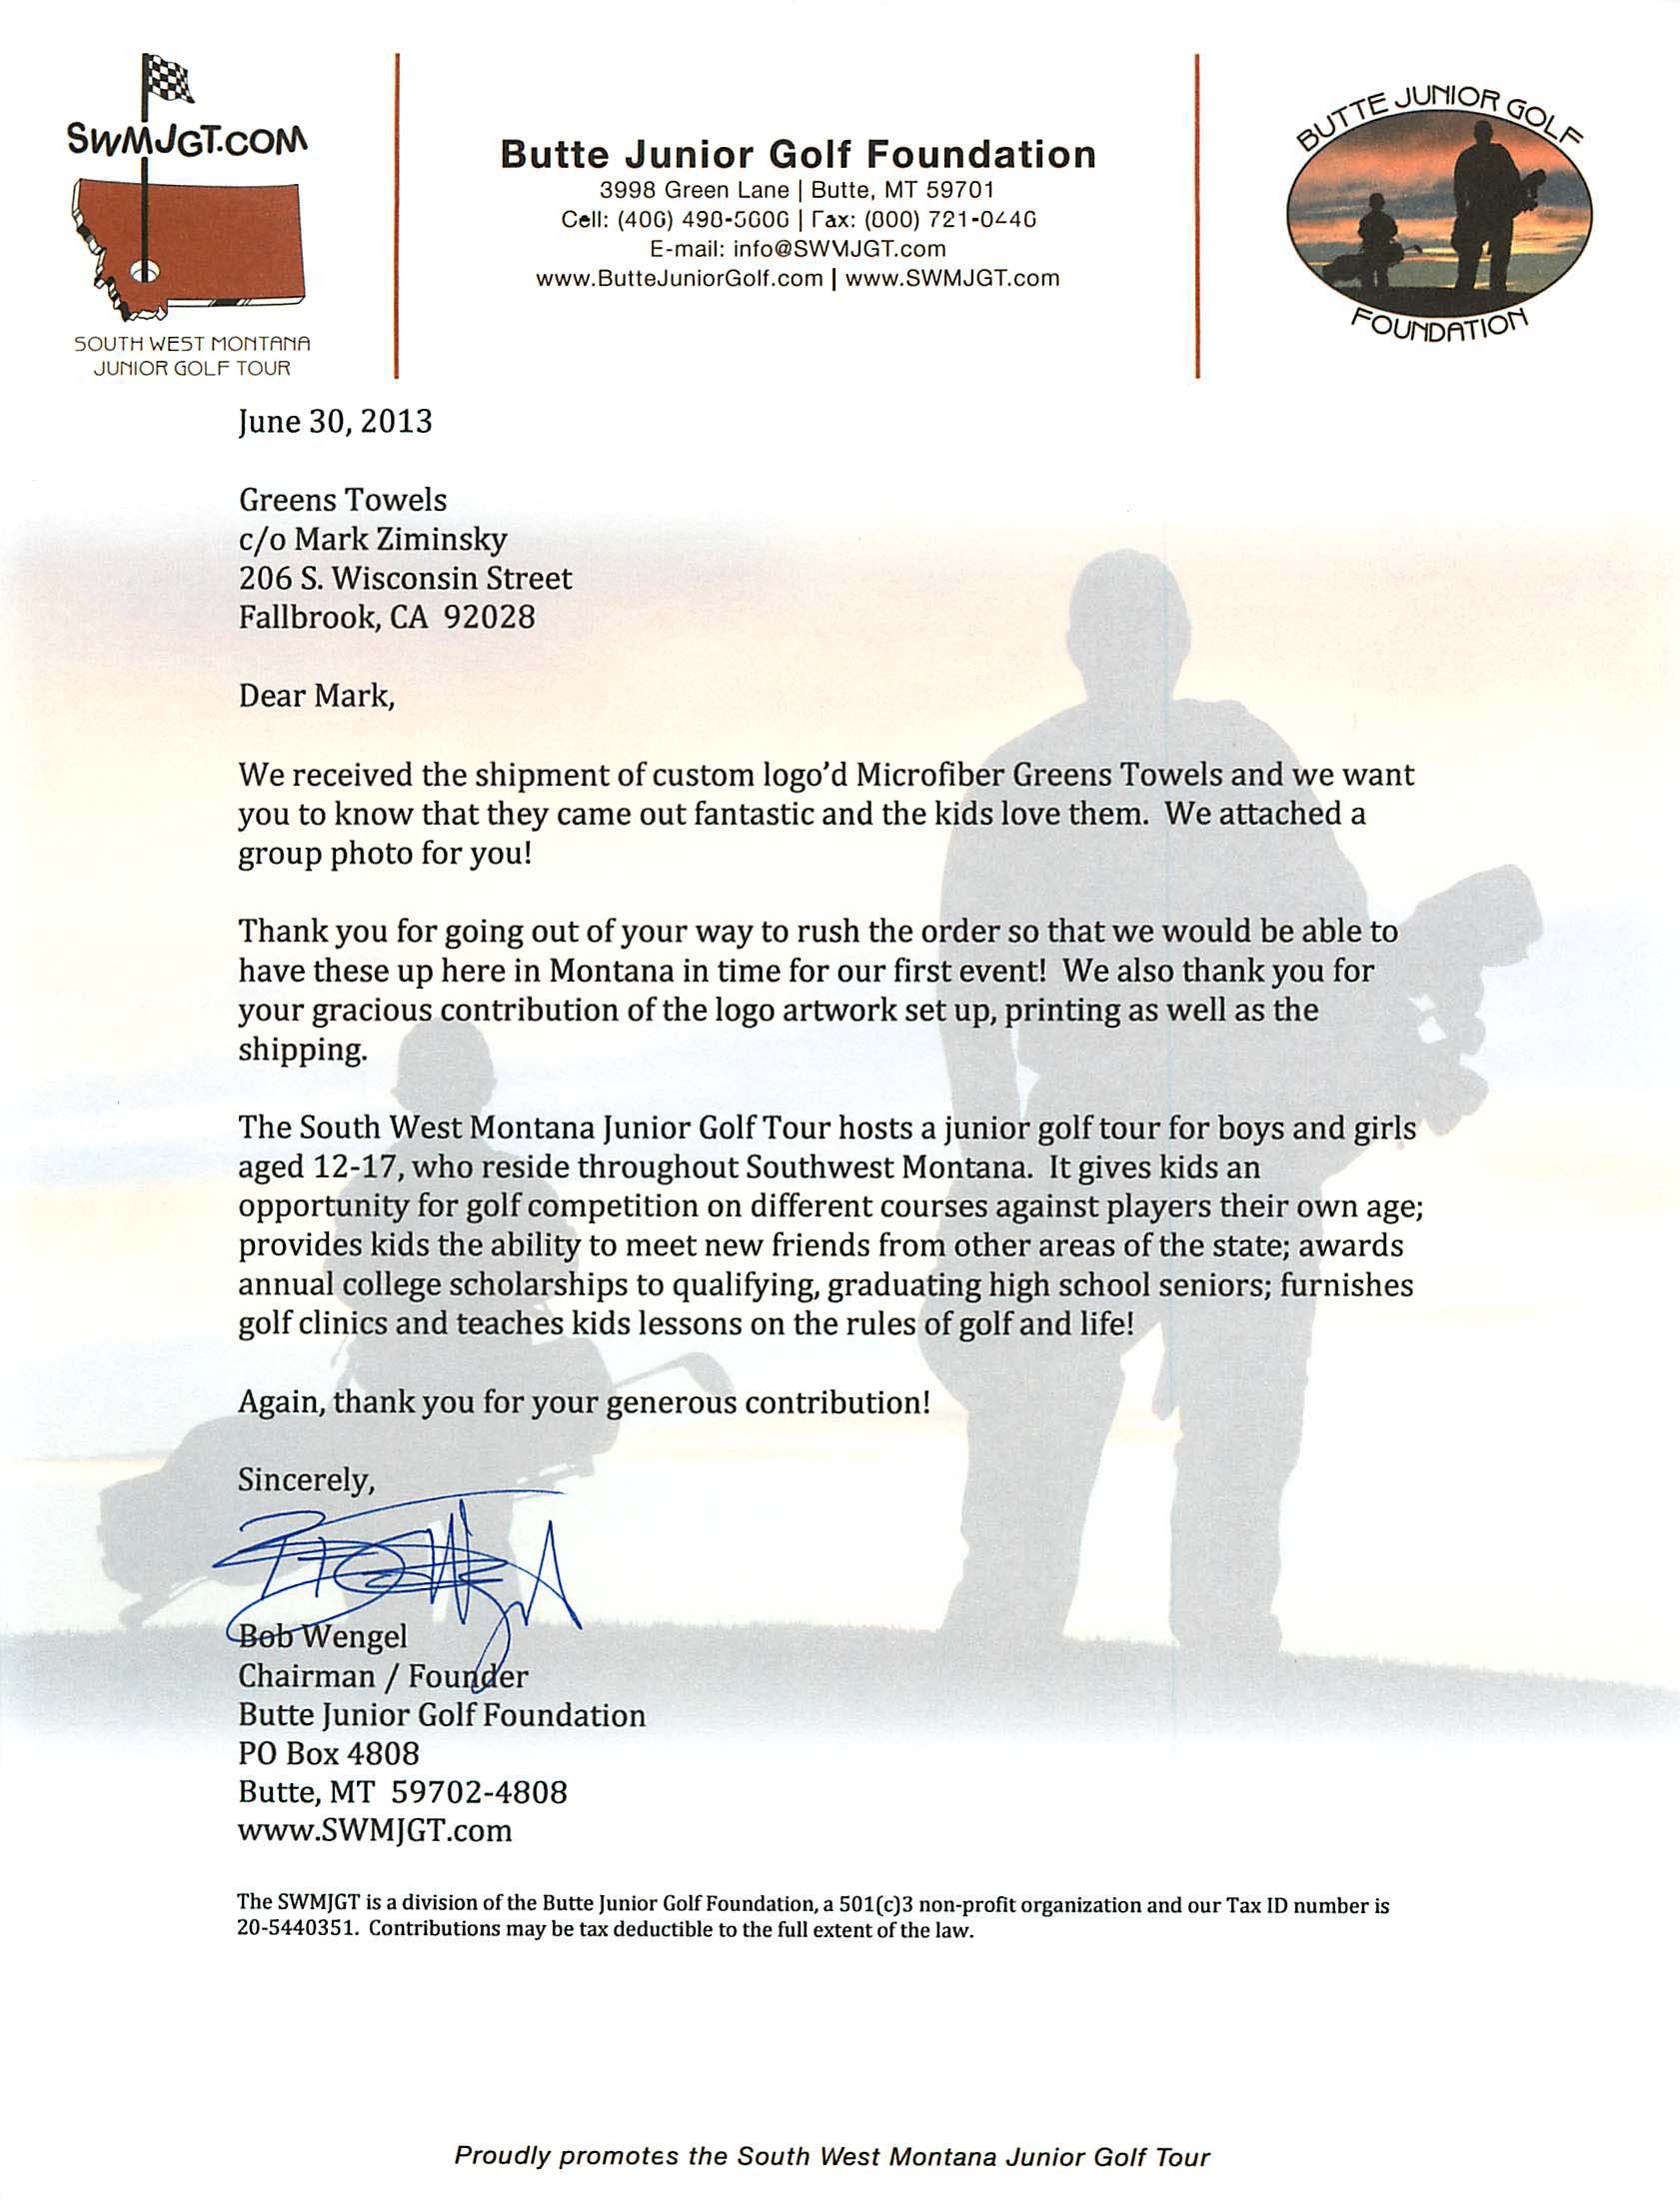 Golf tournament Thank You Letter Template - 40 Fresh Sponsorship Request Letter for event